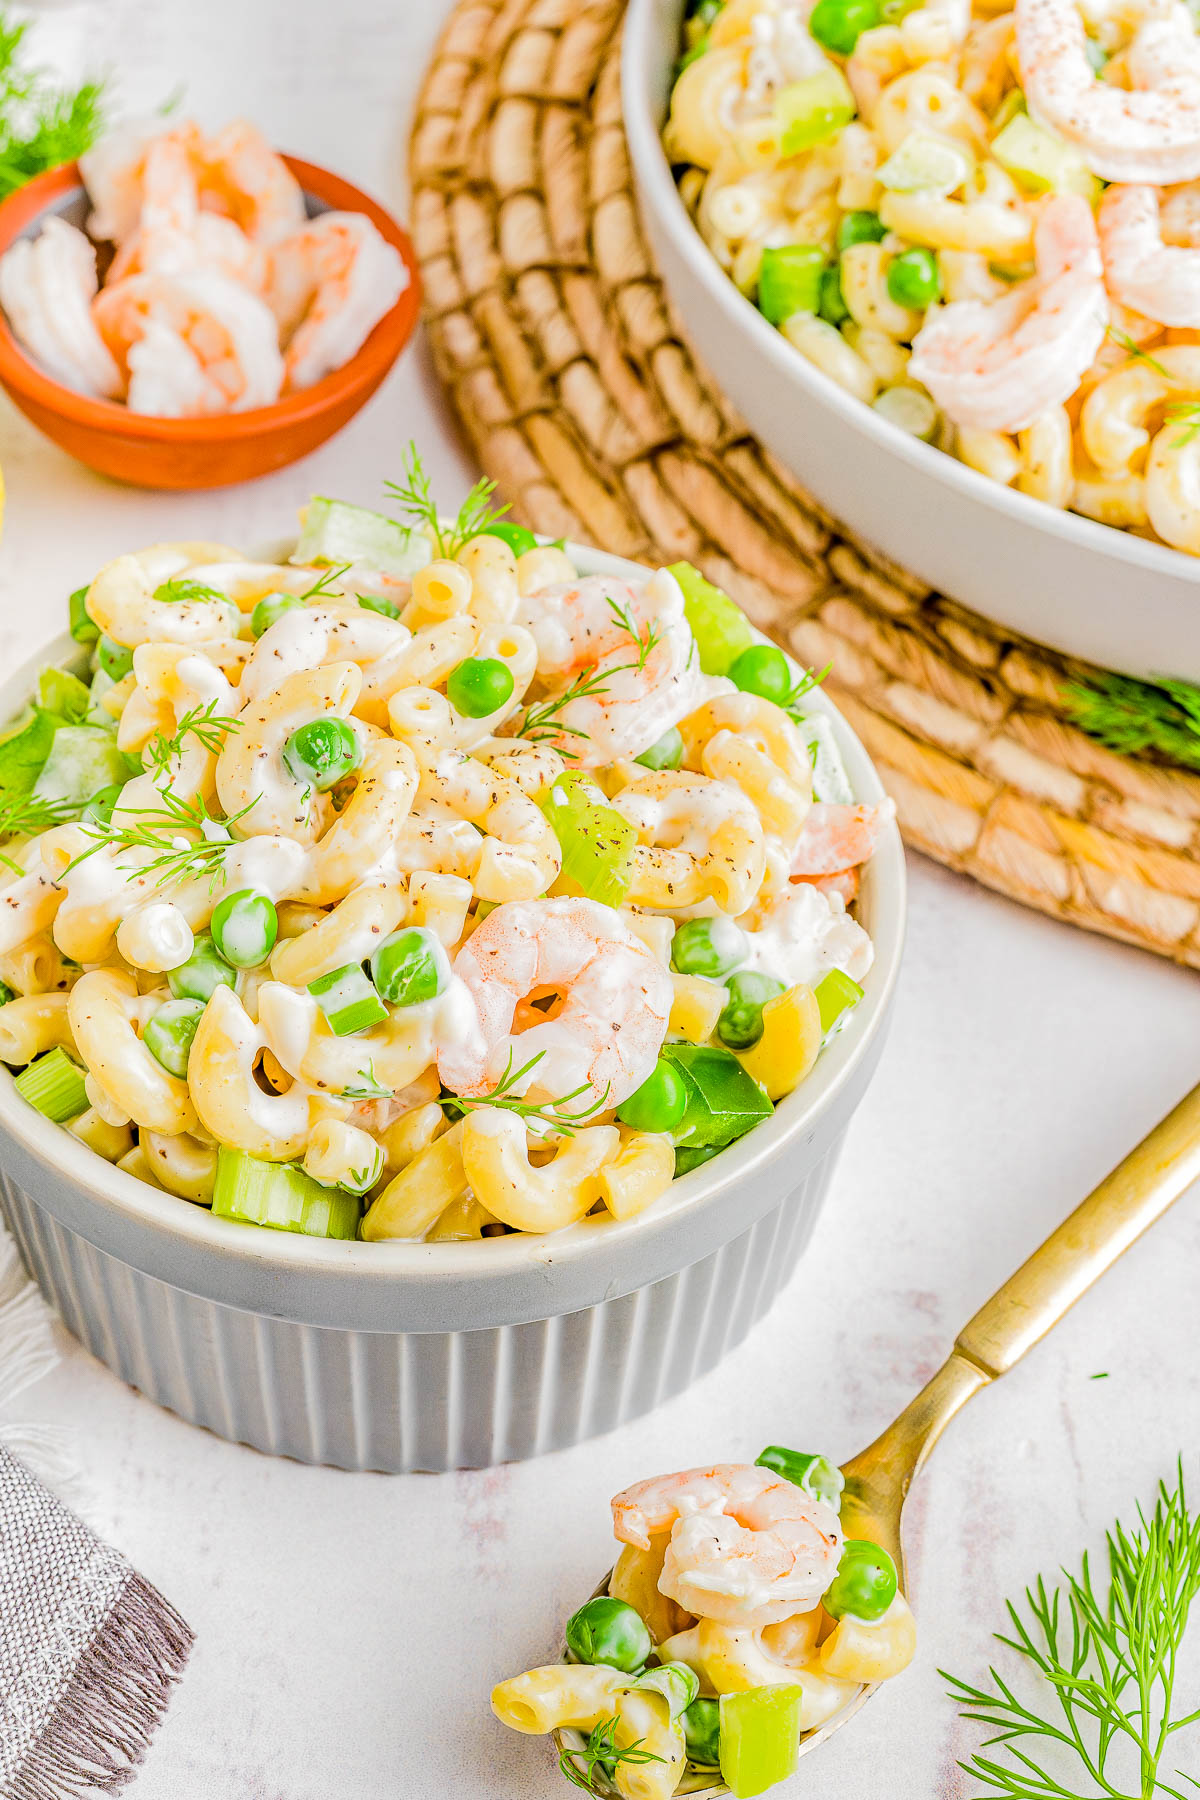 Shrimp Pasta Salad - 🍤🫛🌿 Tender pasta, juicy shrimp, crunchy celery, bell peppers, and peas are tossed in a creamy and tangy homemade dressing for zesty perfection! Great for summer gatherings to serve as a side salad or make it for a lighter yet satisfying stand alone meal for lunch or dinner! Very EASY and always a crowd FAVORITE!